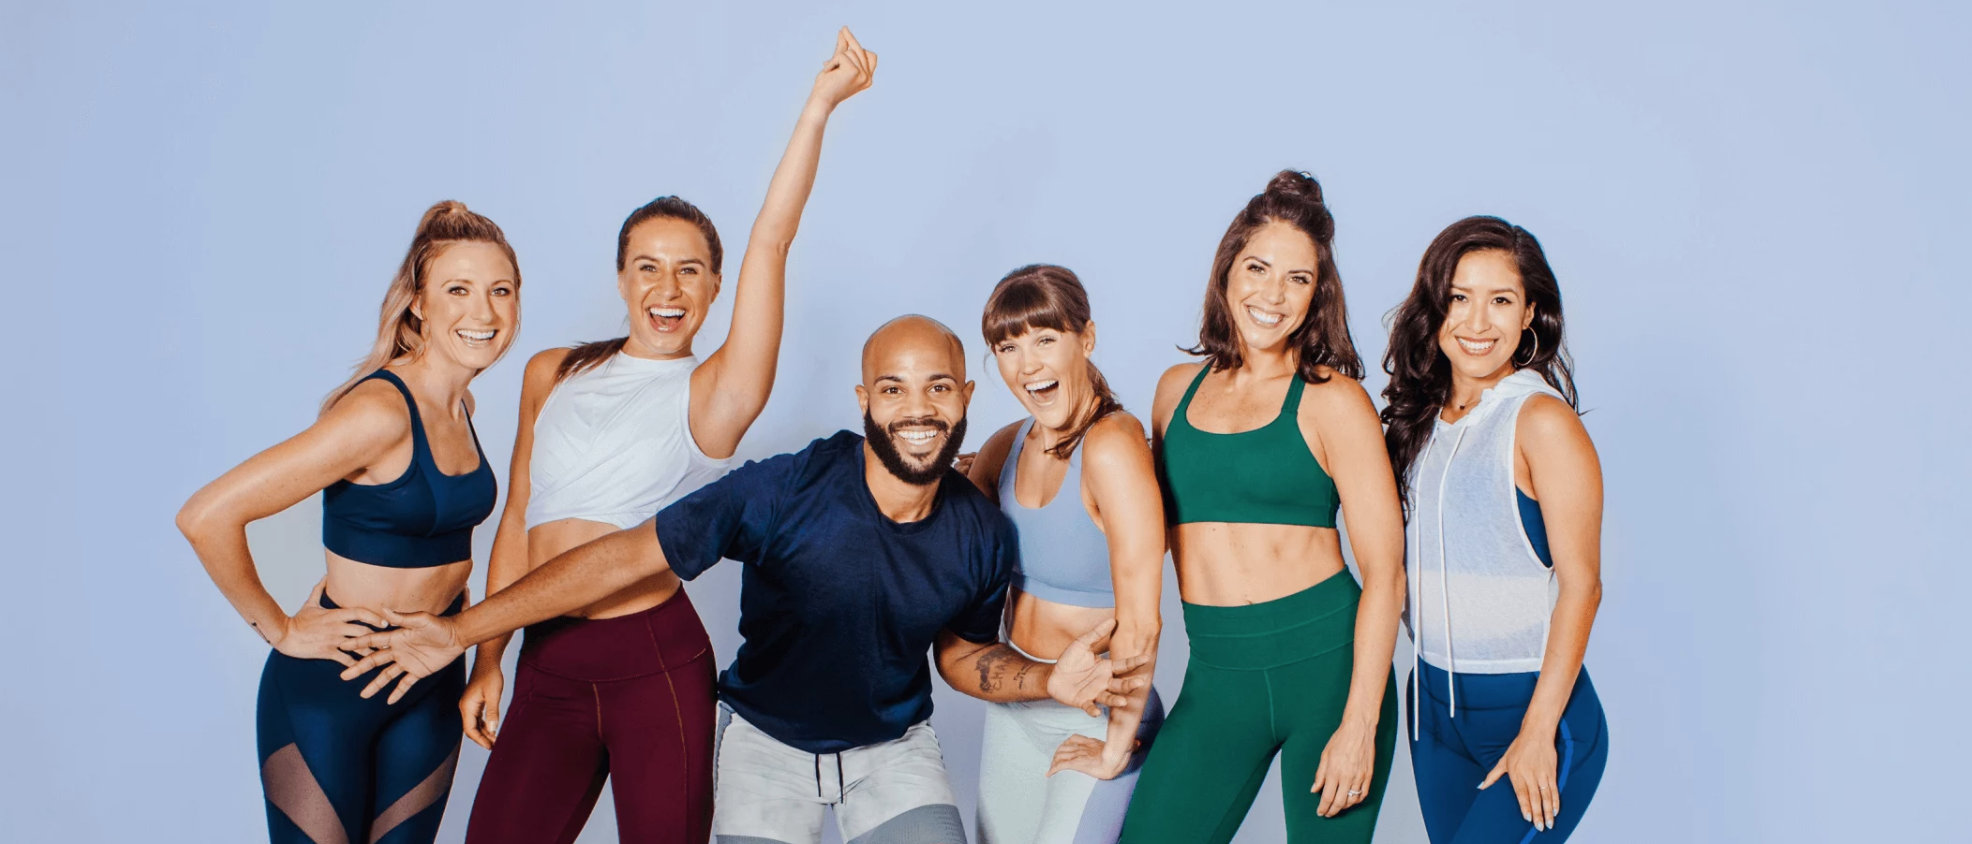 How Influencer Marketing in the Fitness Industry Has Evolved in 2020